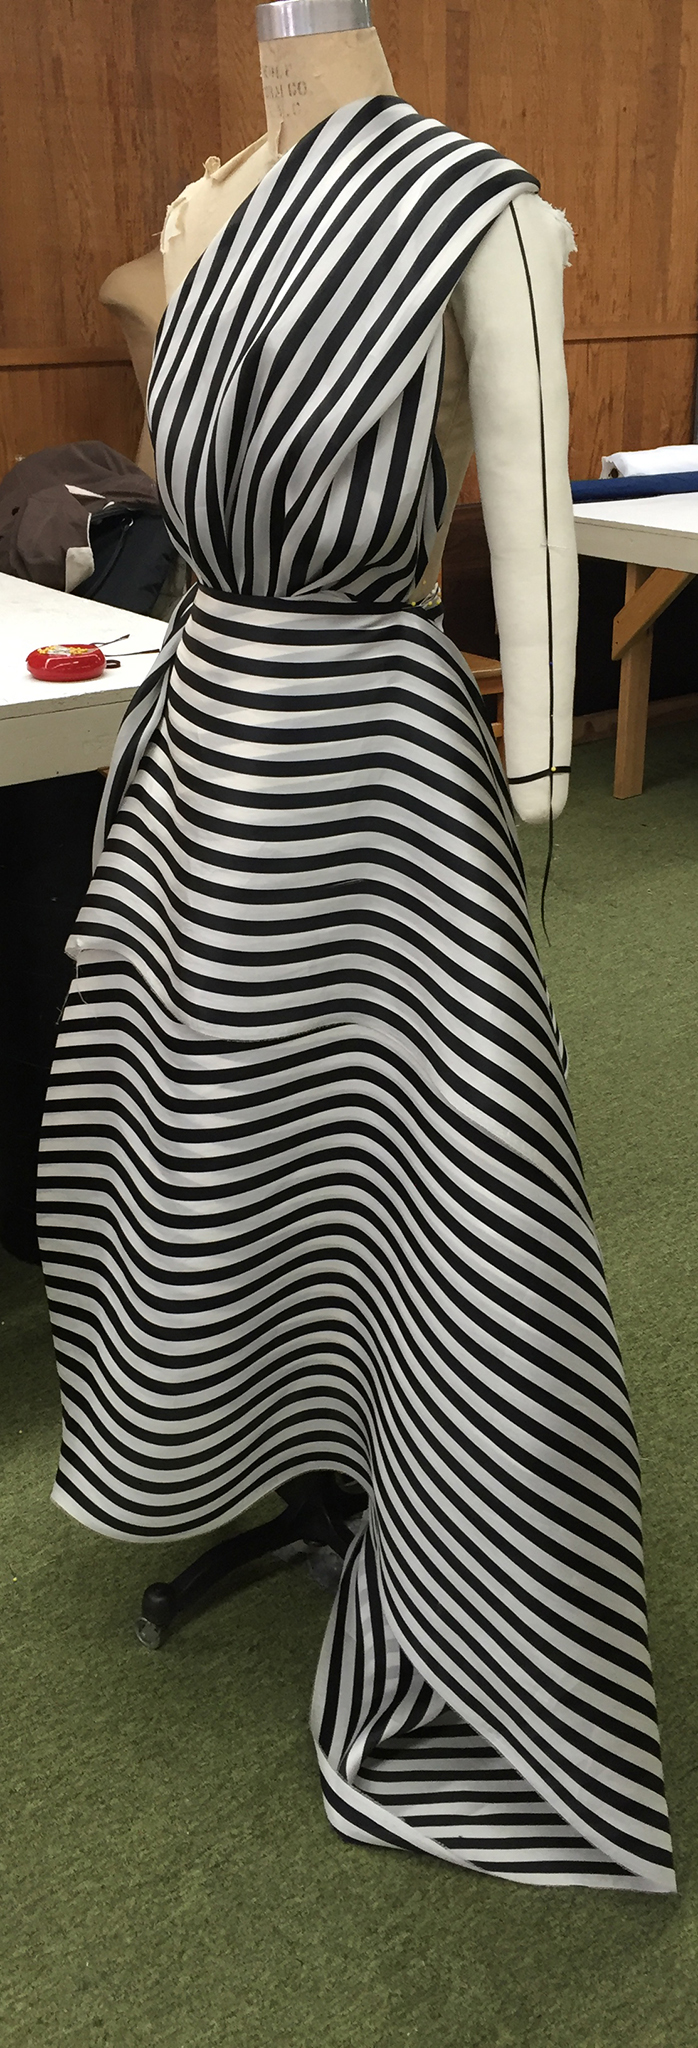 10 yards of continuous black and white silk organza fabric draped over a dress form.